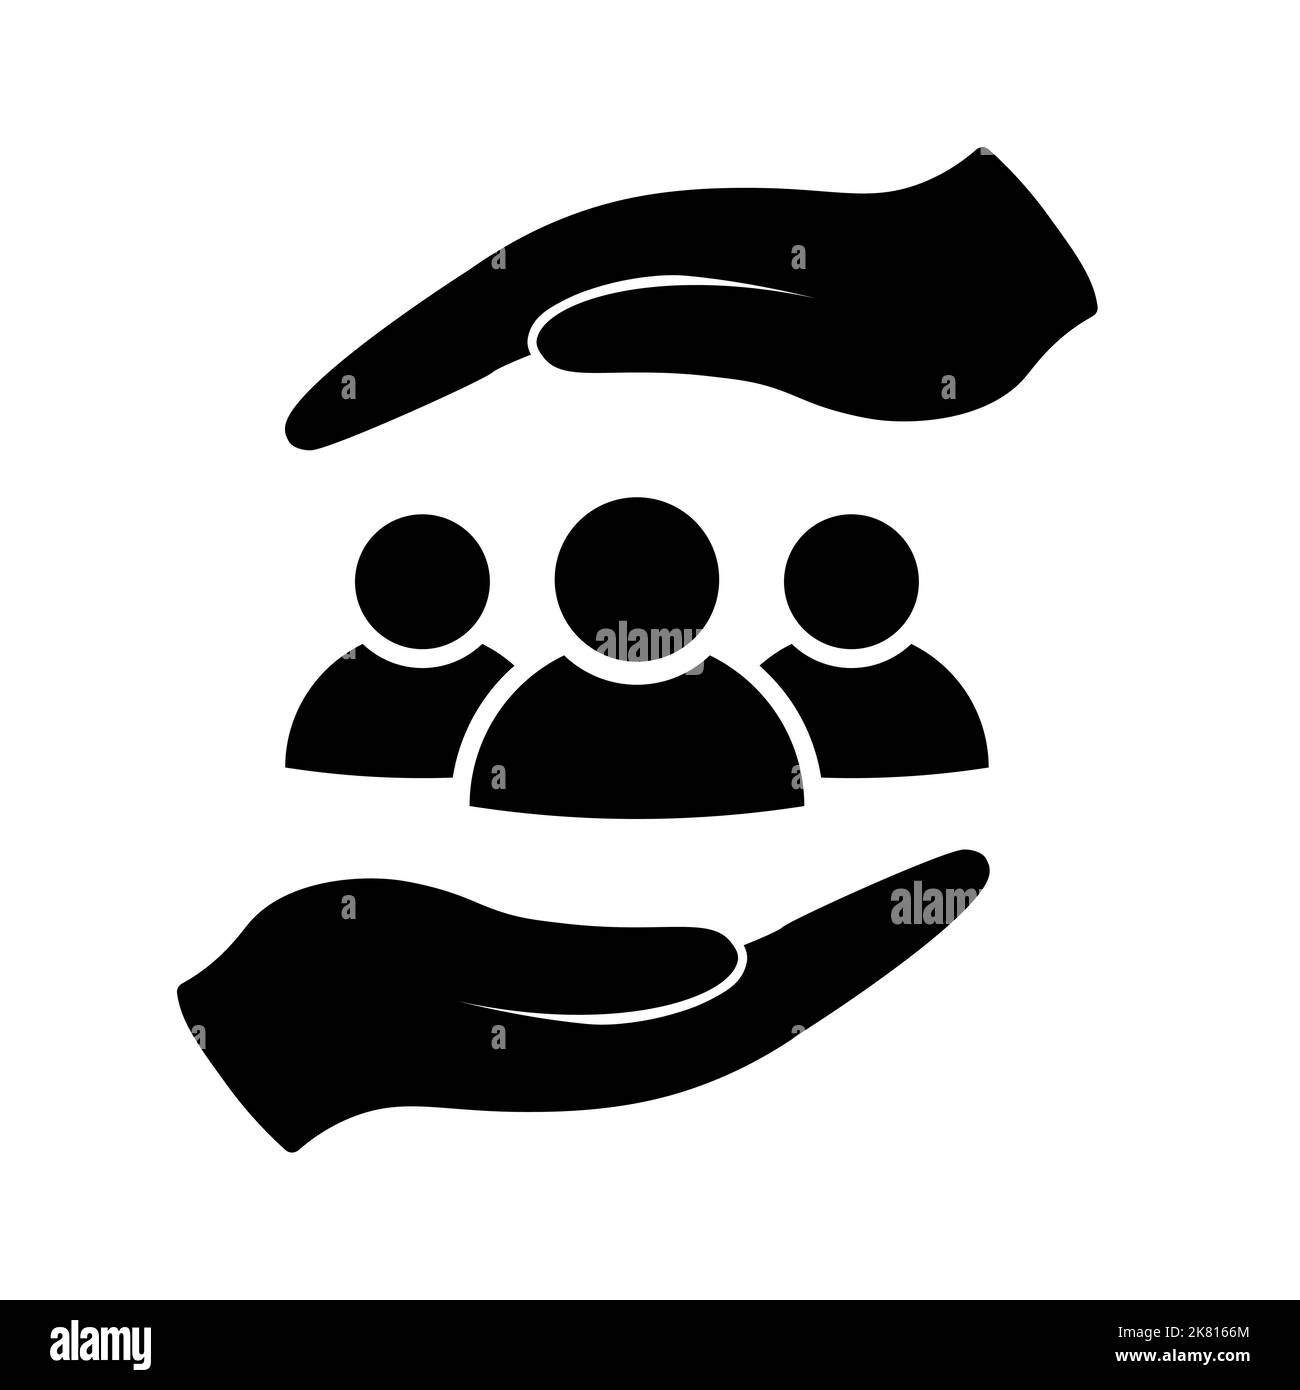 Protecting people icon in flat style. Safe people in hands symbol on white. Charity sign in black. Help to community simple abstract icon. Vector illu Stock Vector